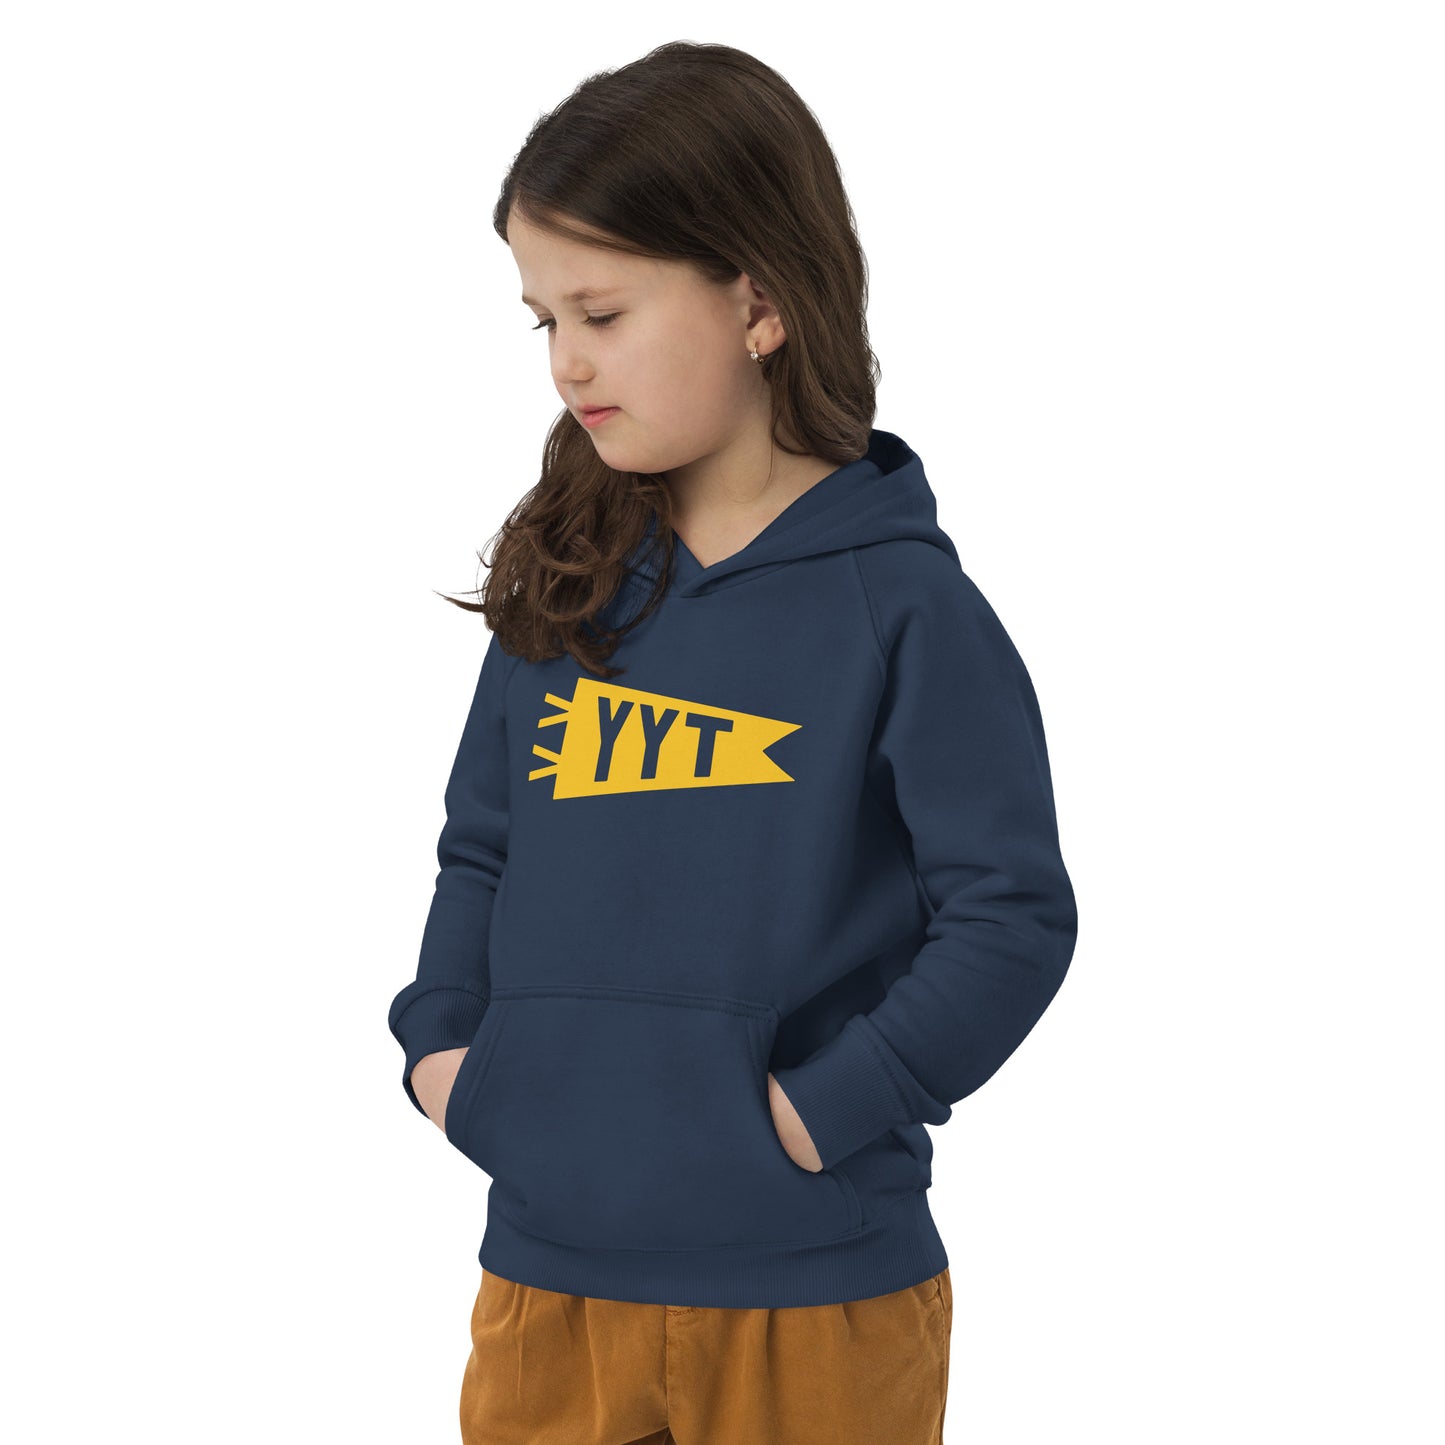 Kid's Sustainable Hoodie - Yellow Graphic • YYT St. John's • YHM Designs - Image 05